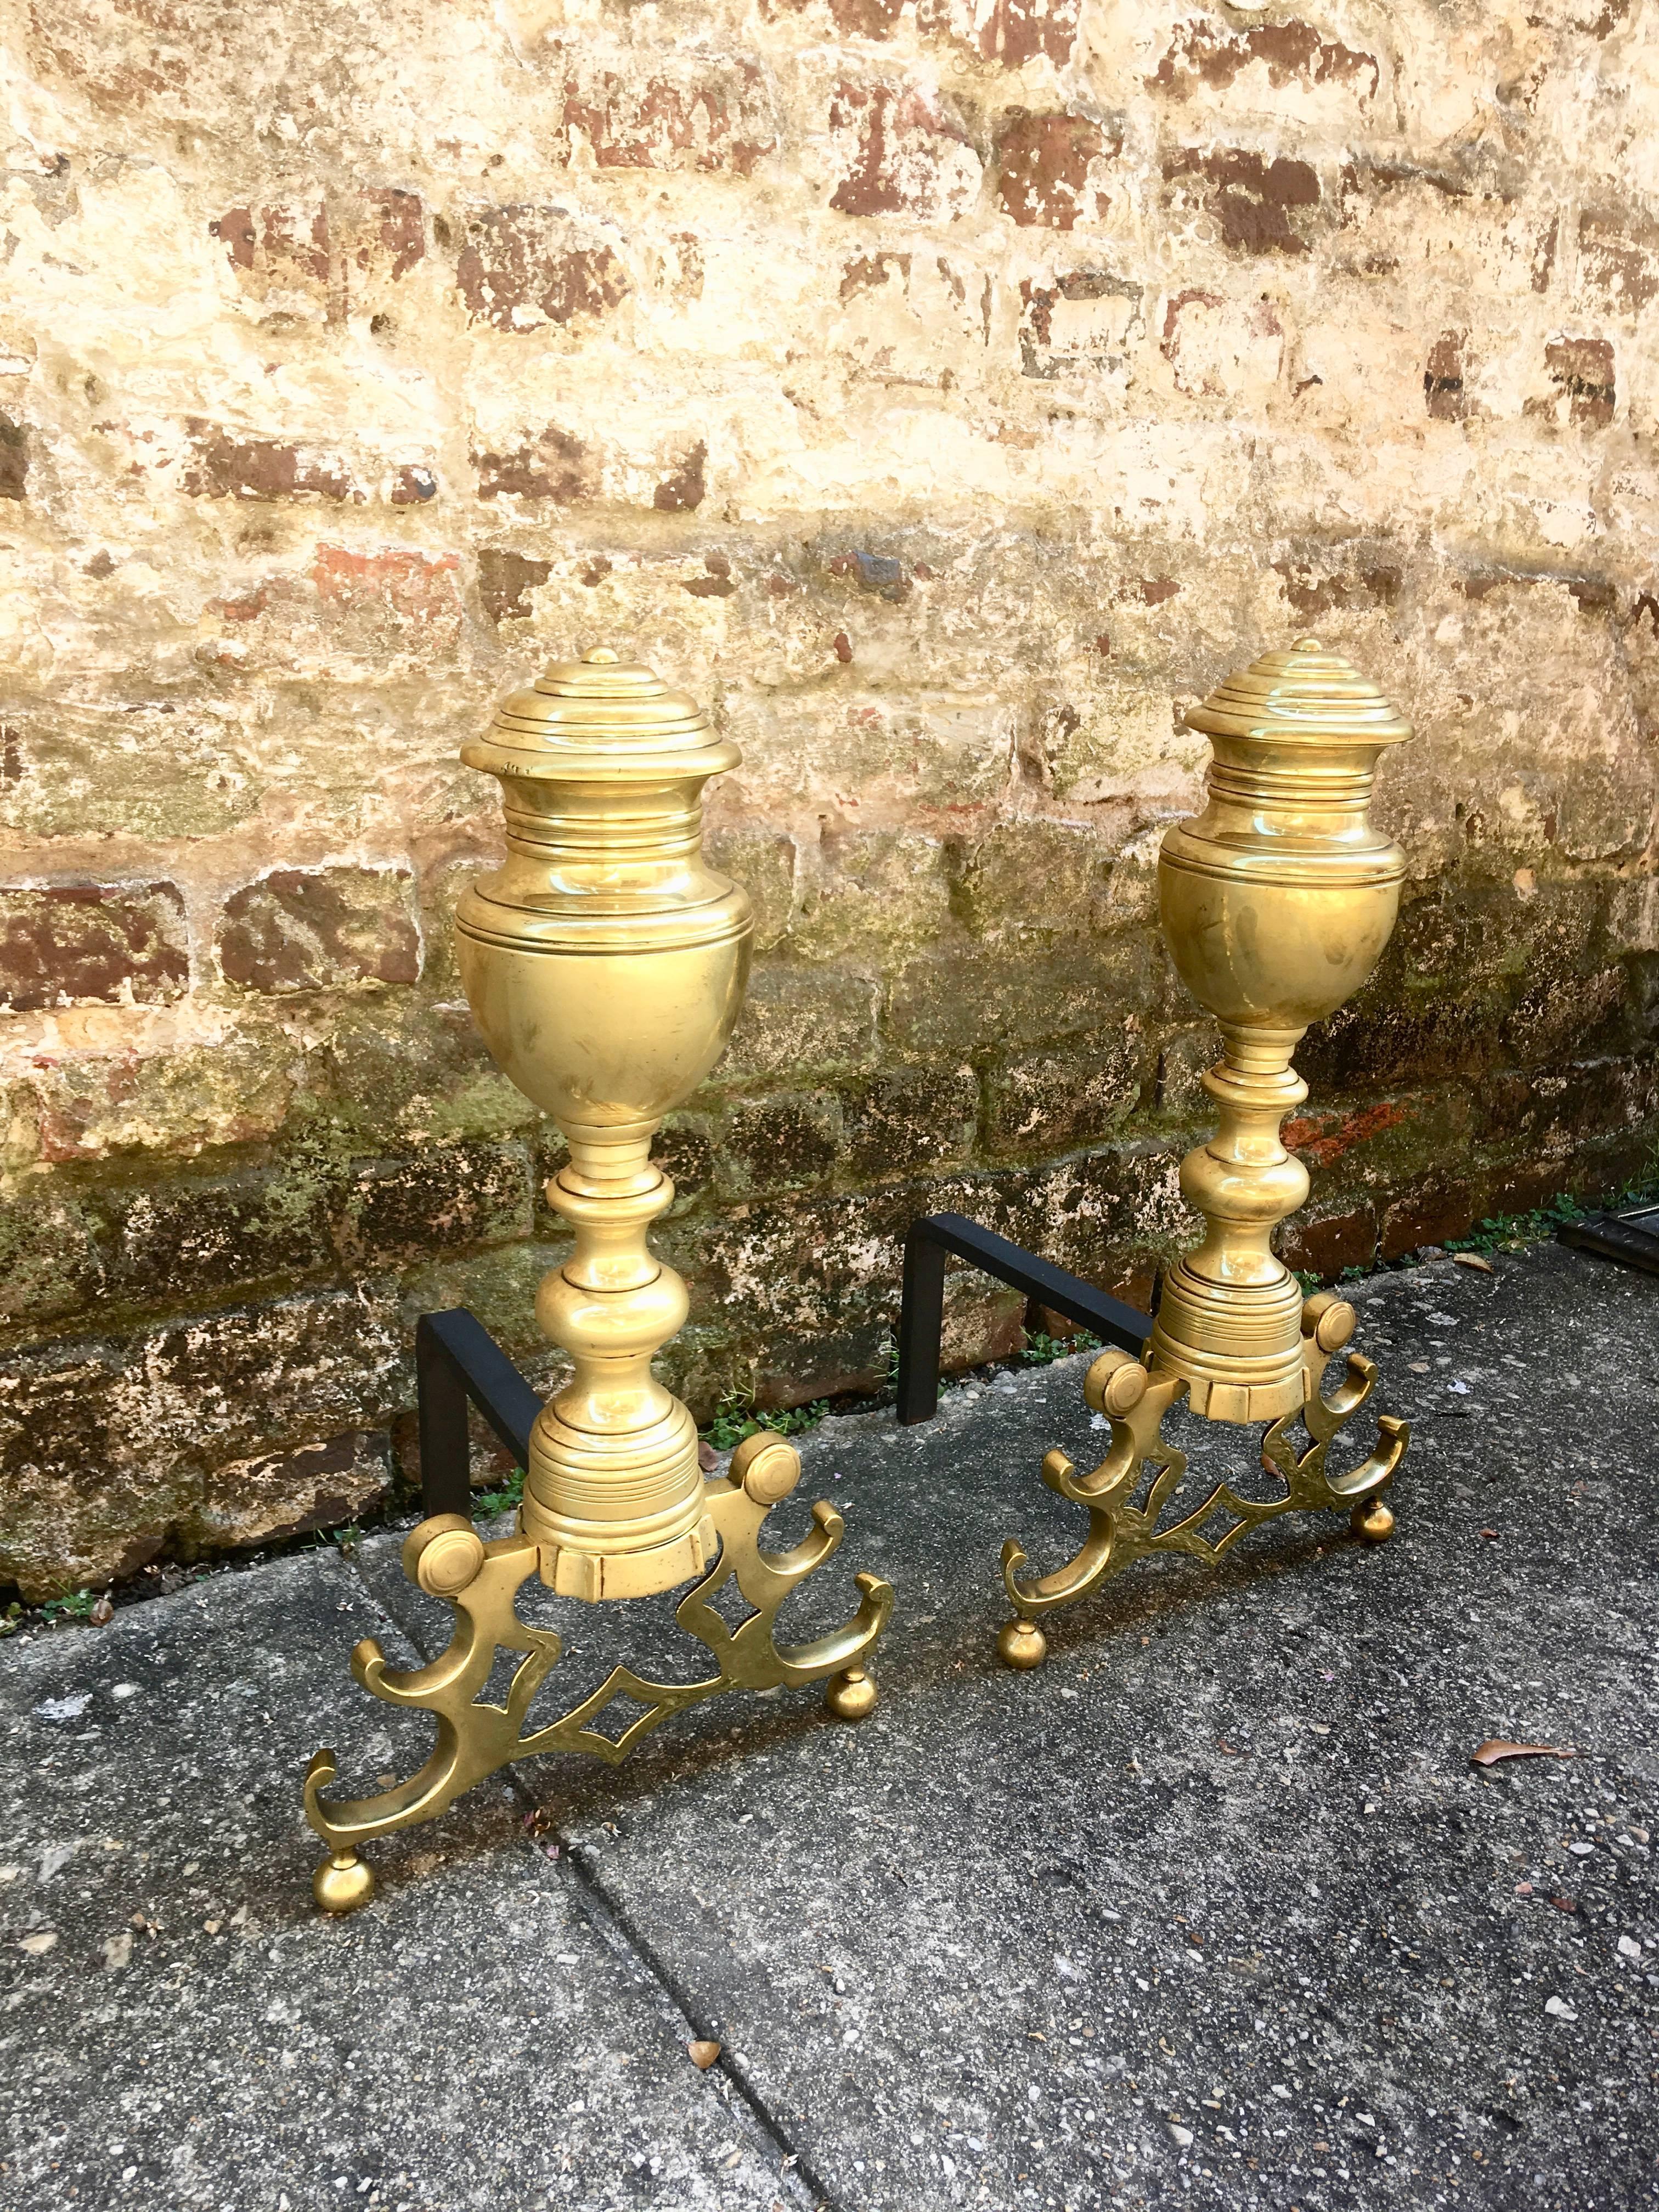 American urn top andirons with ornate base.